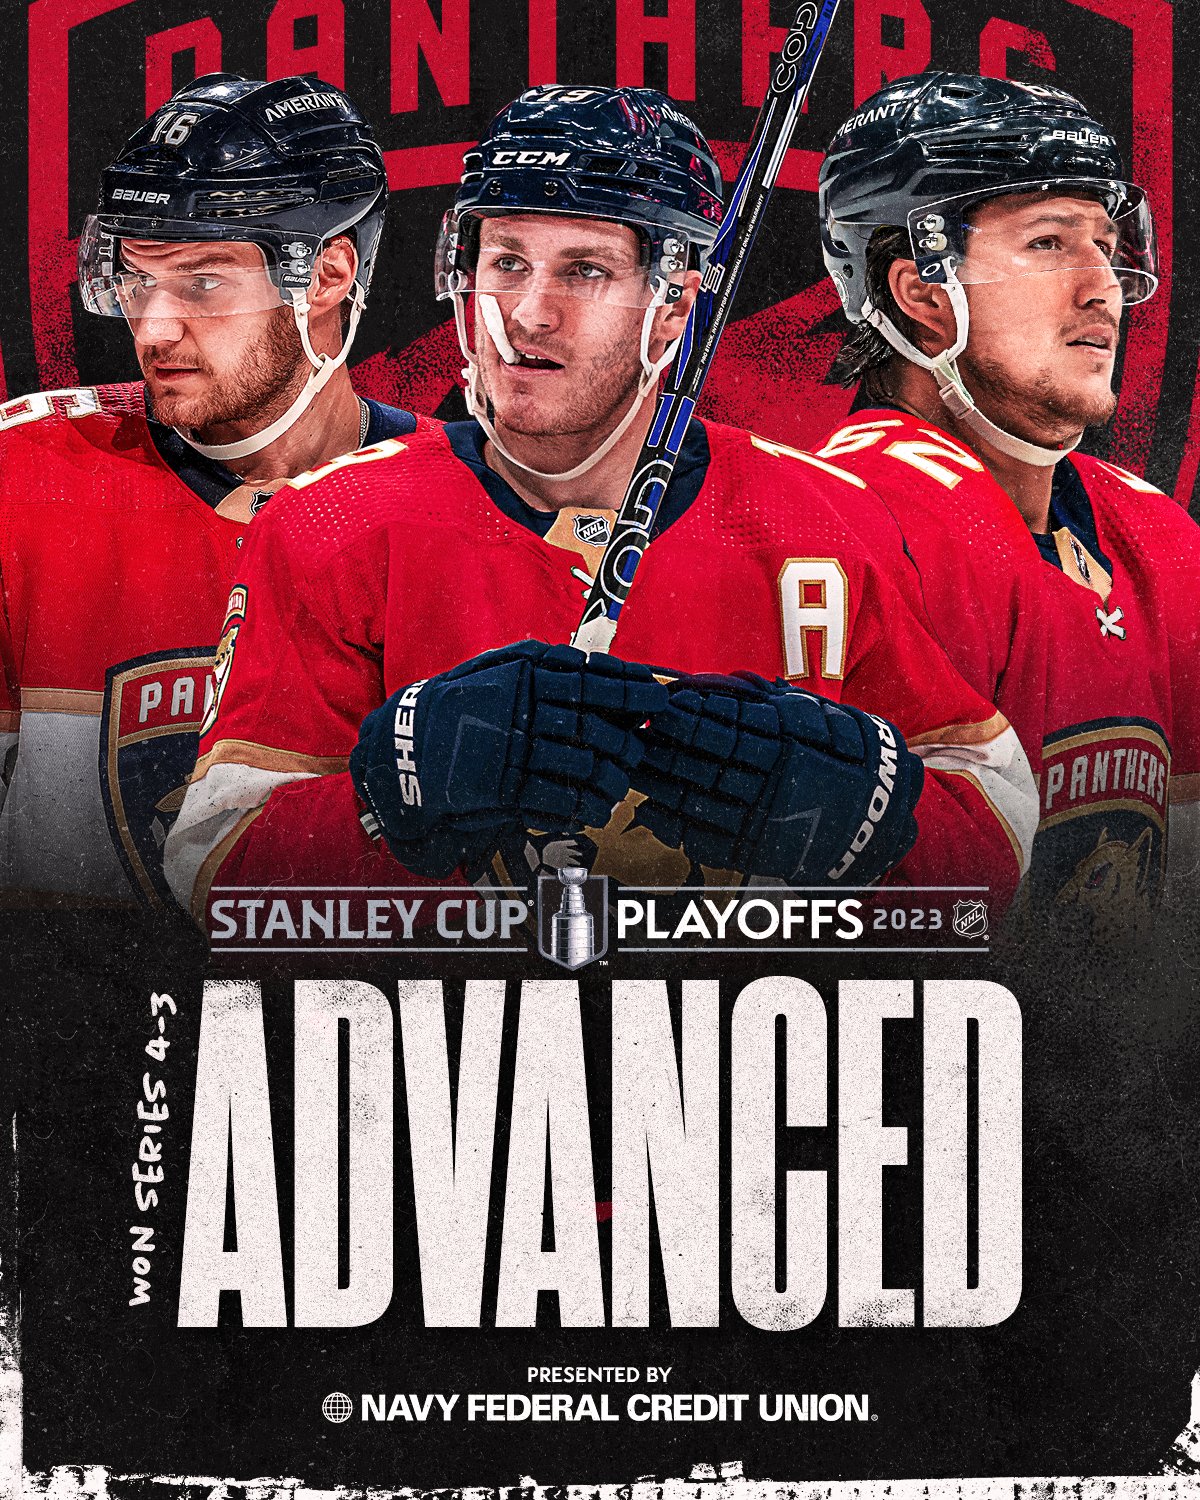 Blackhawks win Game 7, advance to Stanley Cup Finals